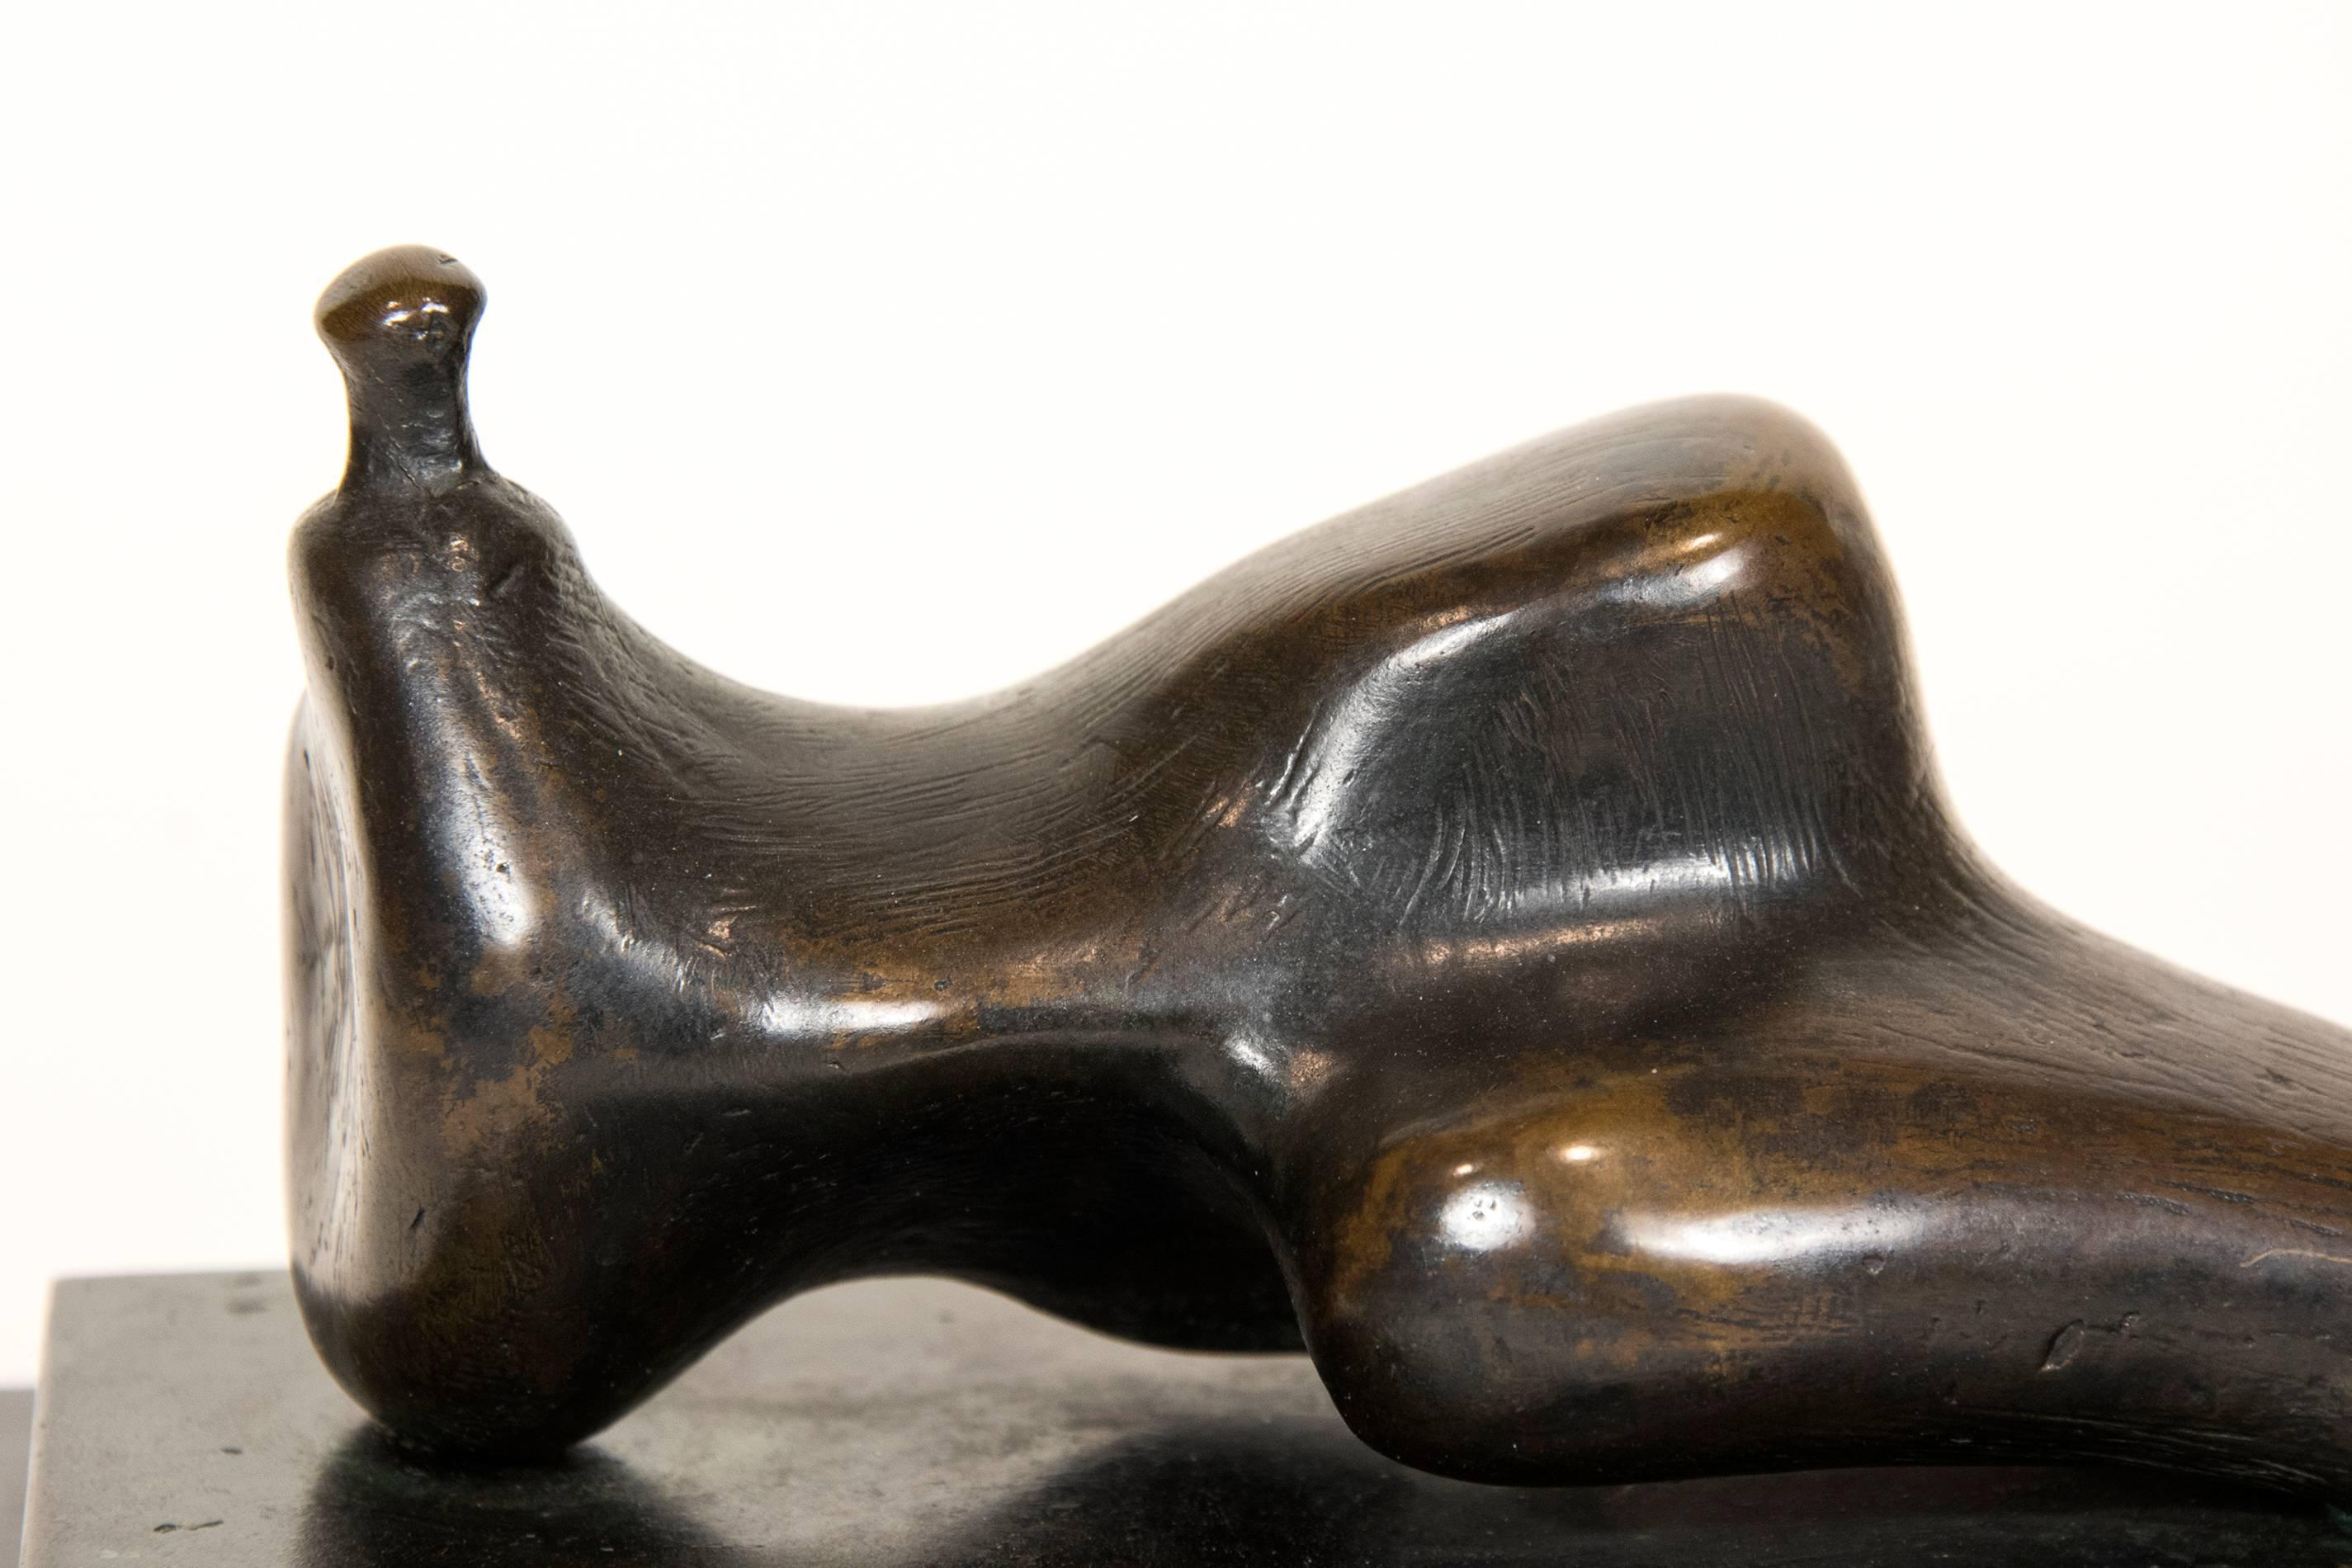 Reclining Figure Small Head - Gold Figurative Sculpture by Henry Moore